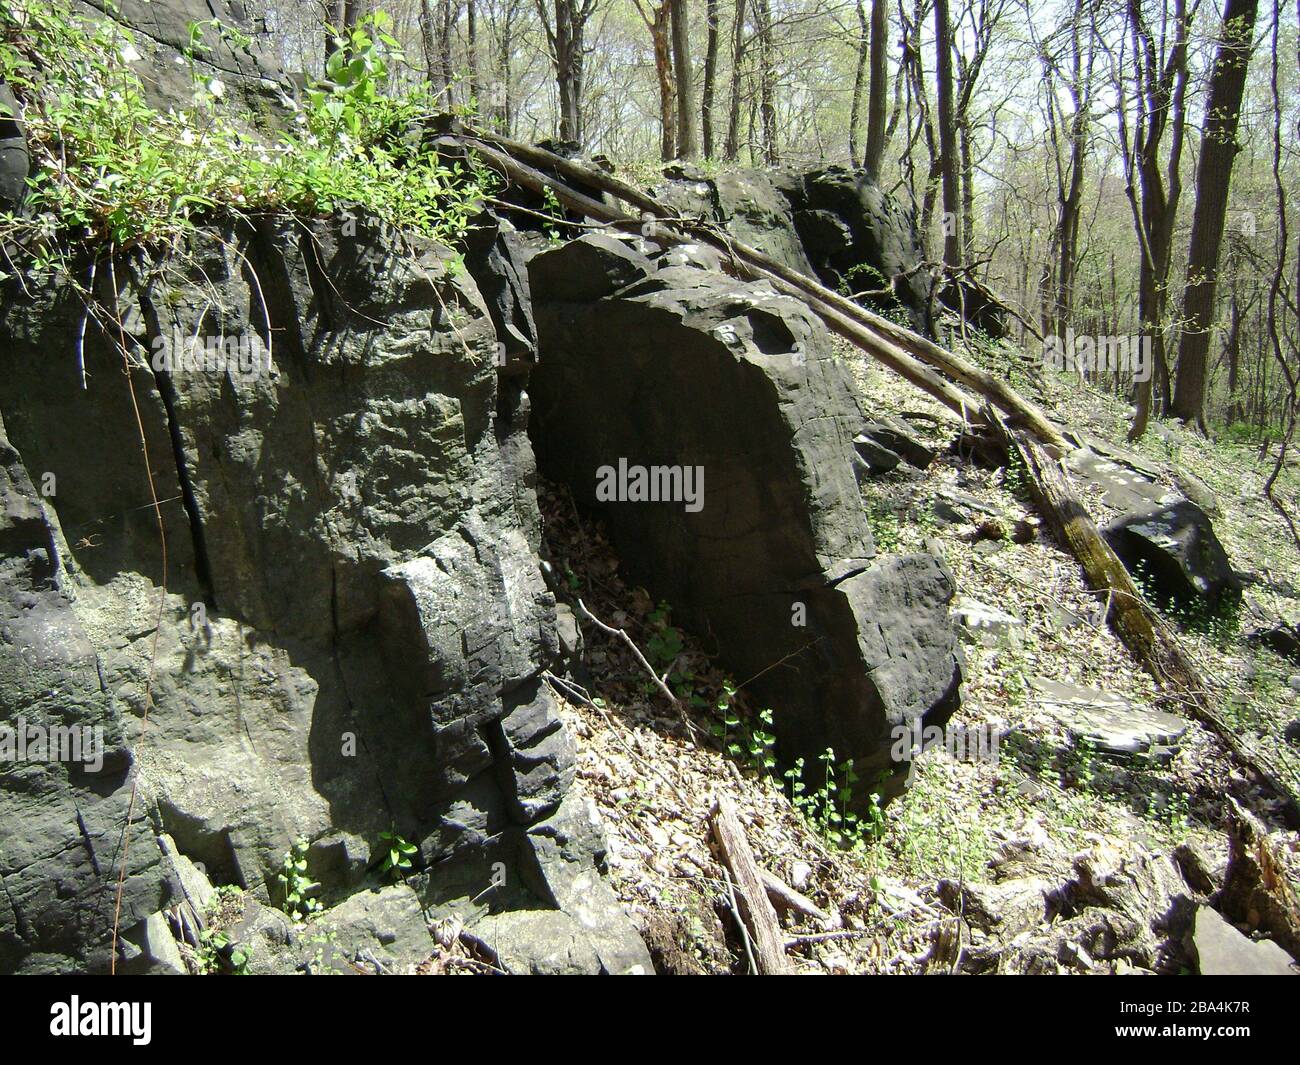 English: A ledge composed of argillite and argillite derived hornfels  emerges along the 380ft (115m) contour of— located near Hillsborough  Township, New Jersey. Typical argillite in this region is a grayish color,